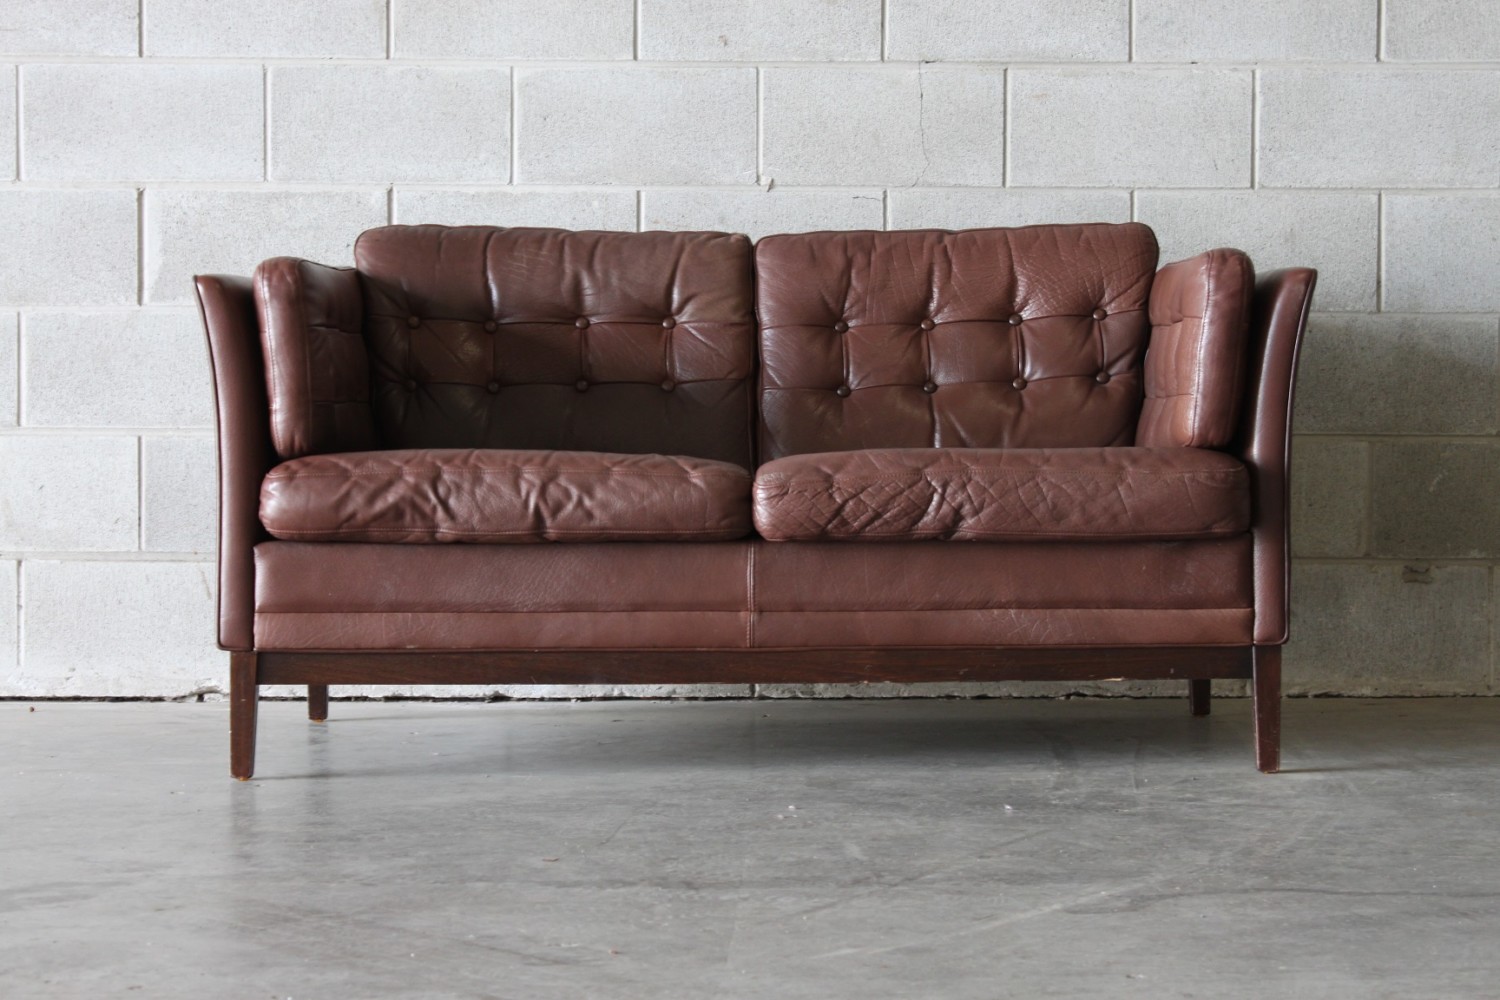 Pair of brown button backed sofas